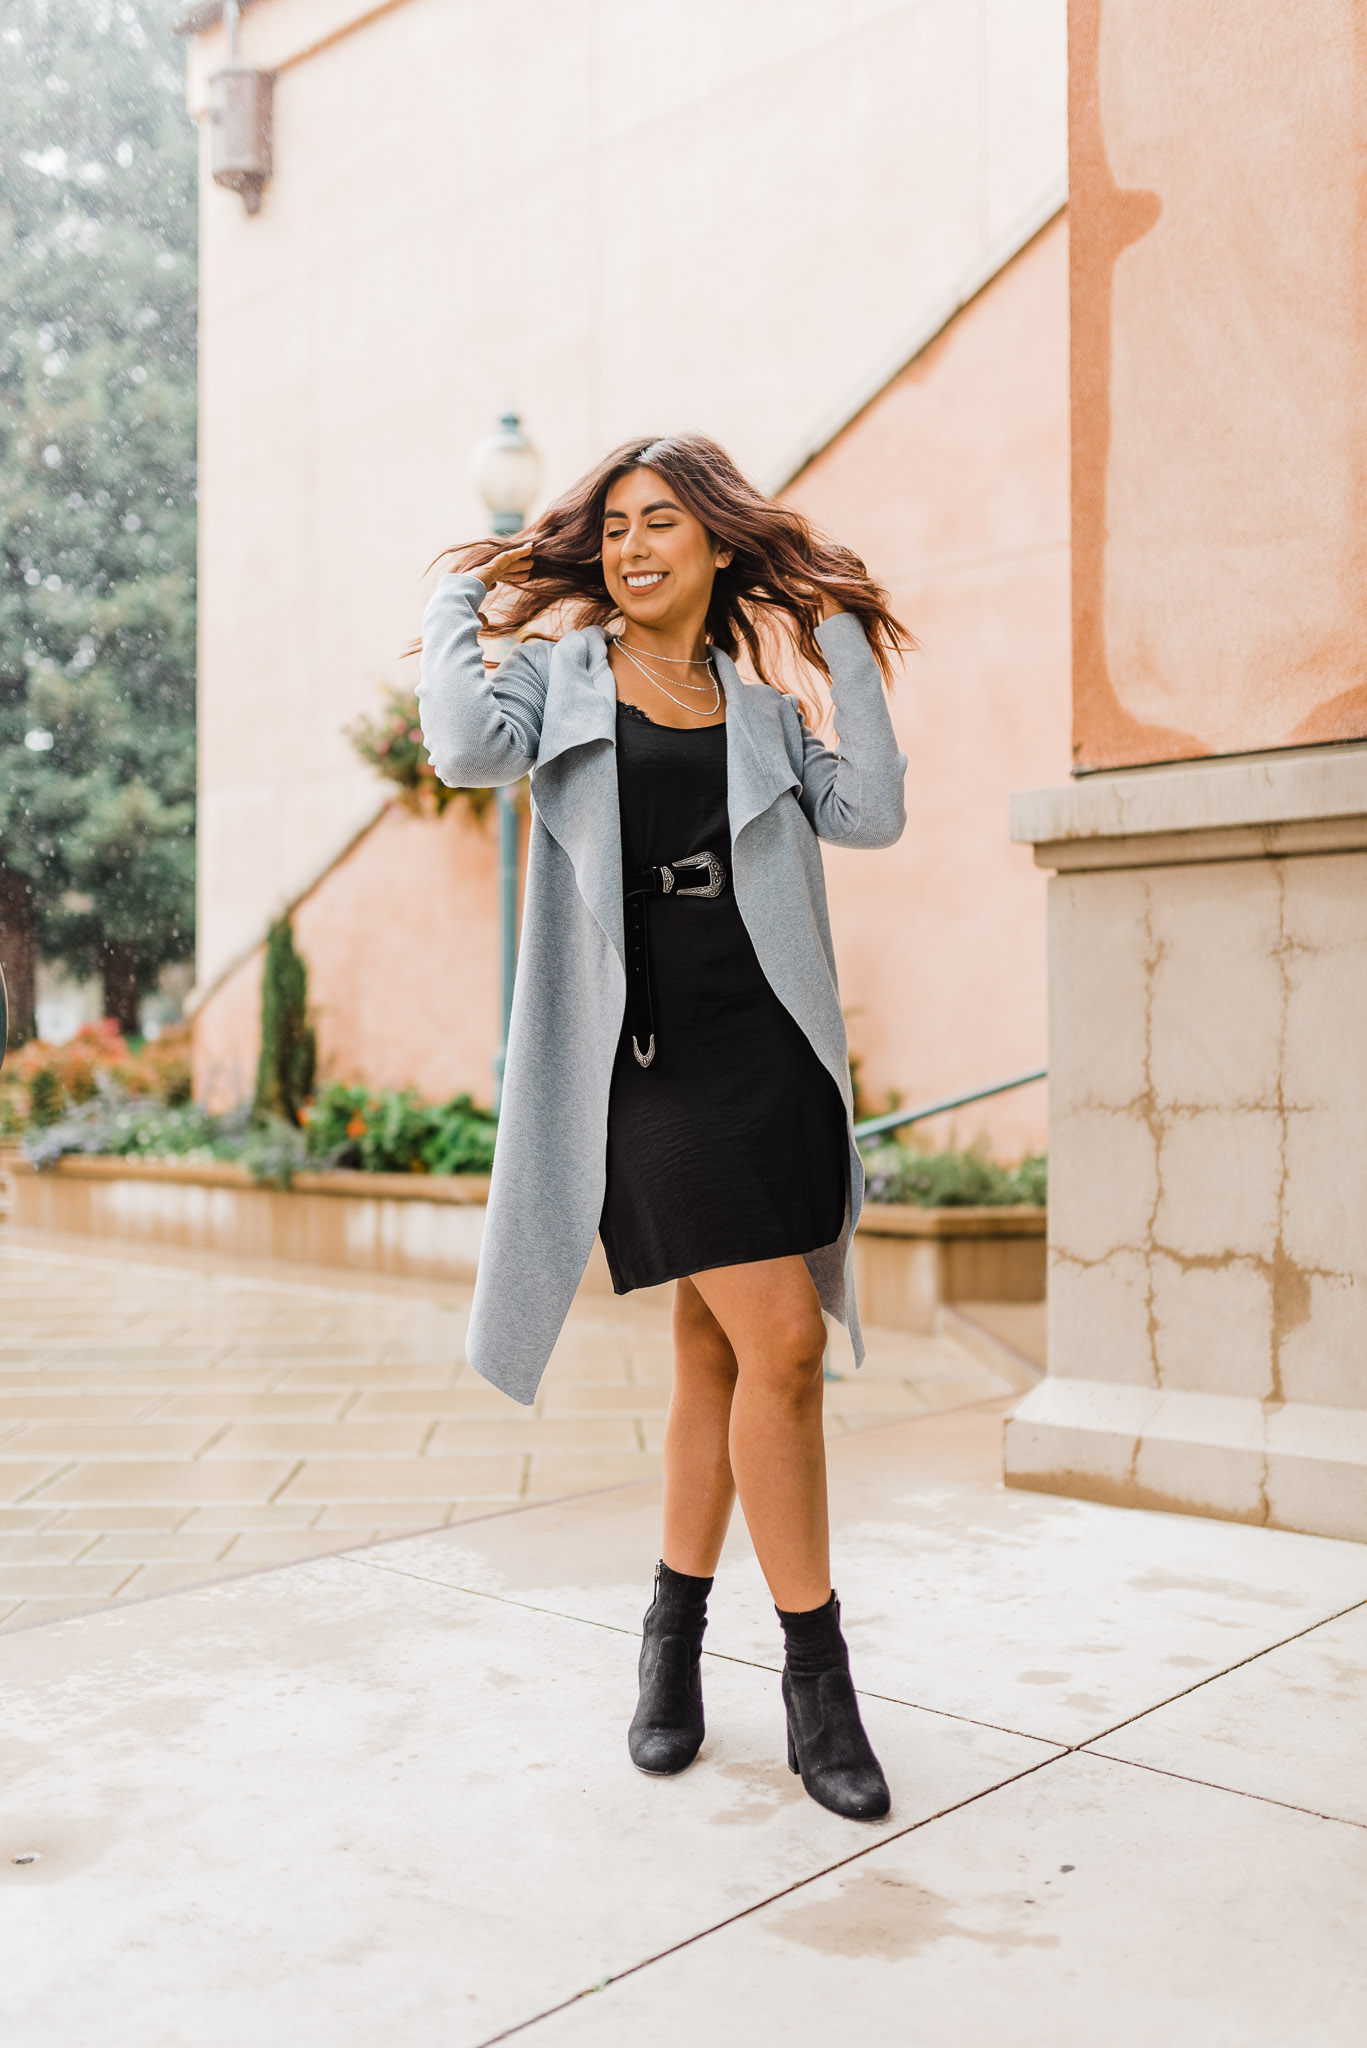 Fashion blogger doing a hair flip. Wearing a black dress with a long gray sweater.